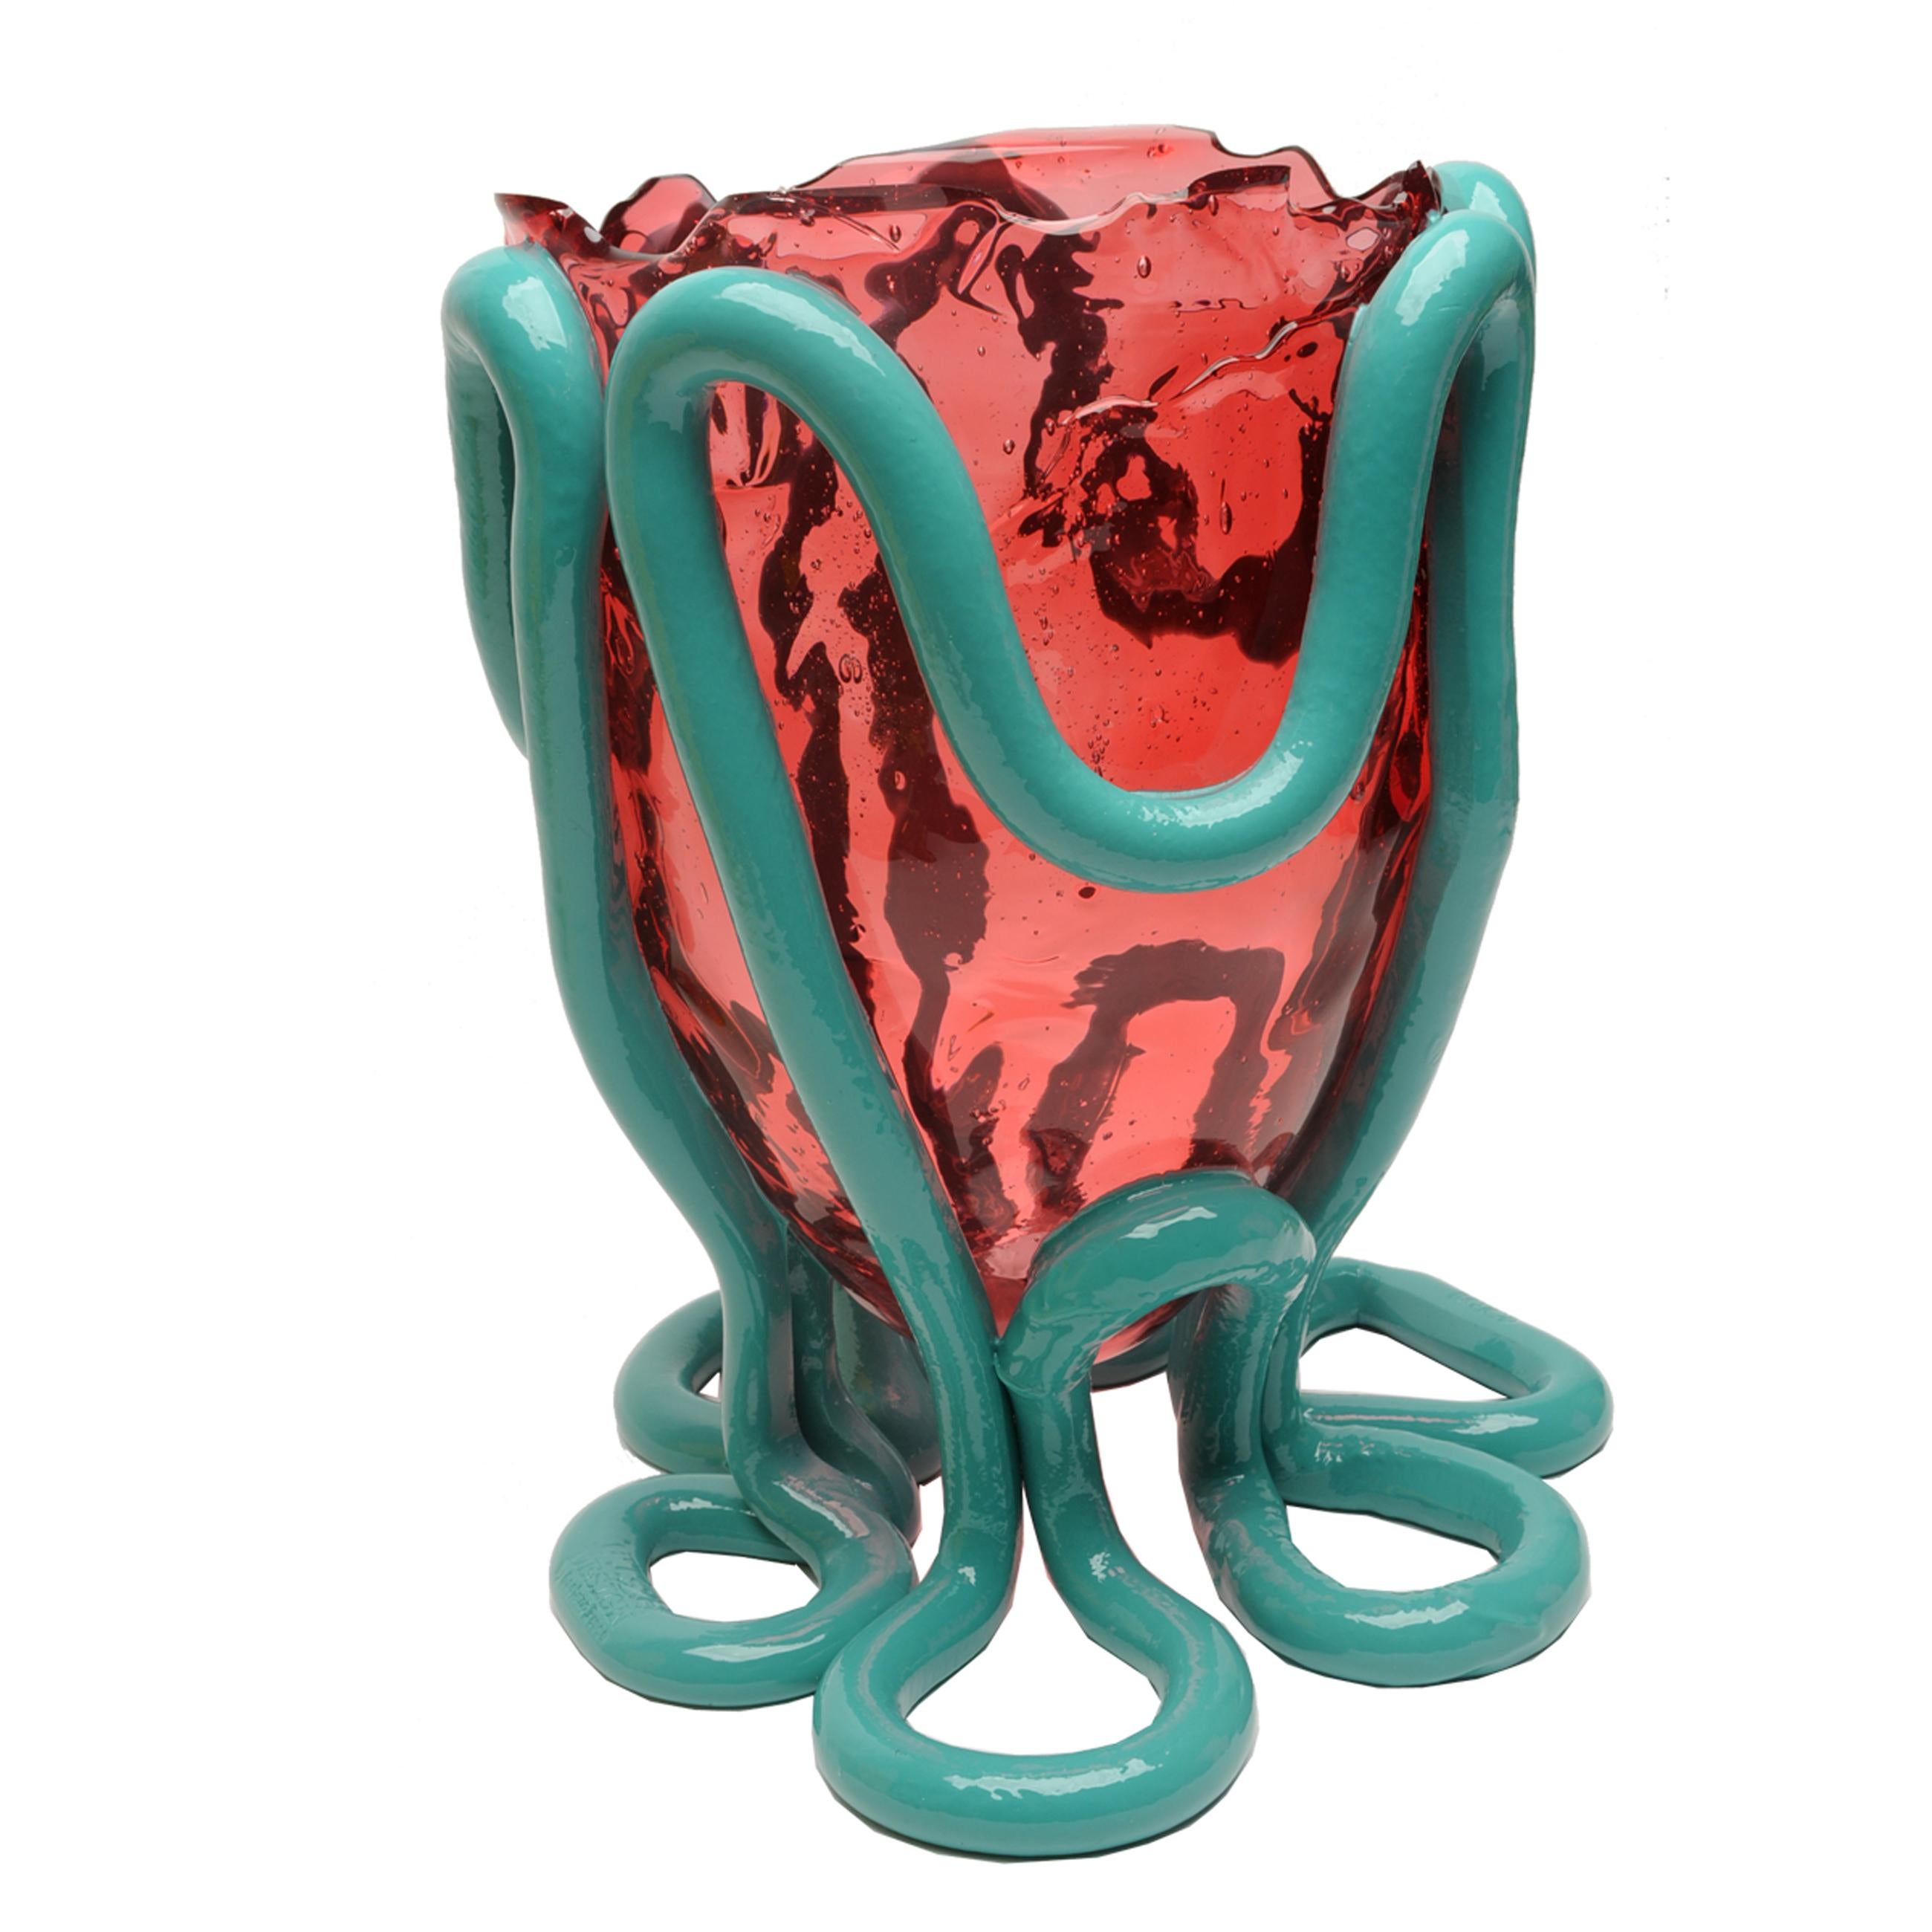 Indian Summer vase, clear light fuchsia and matt ocean blue.

Vase in soft resin designed by Gaetano Pesce in 1995 for Fish design collection.

Measures: M - ø 16cm x H 26 cm.

Other sizes available.

Colours: clear light fuchsia and matt ocean